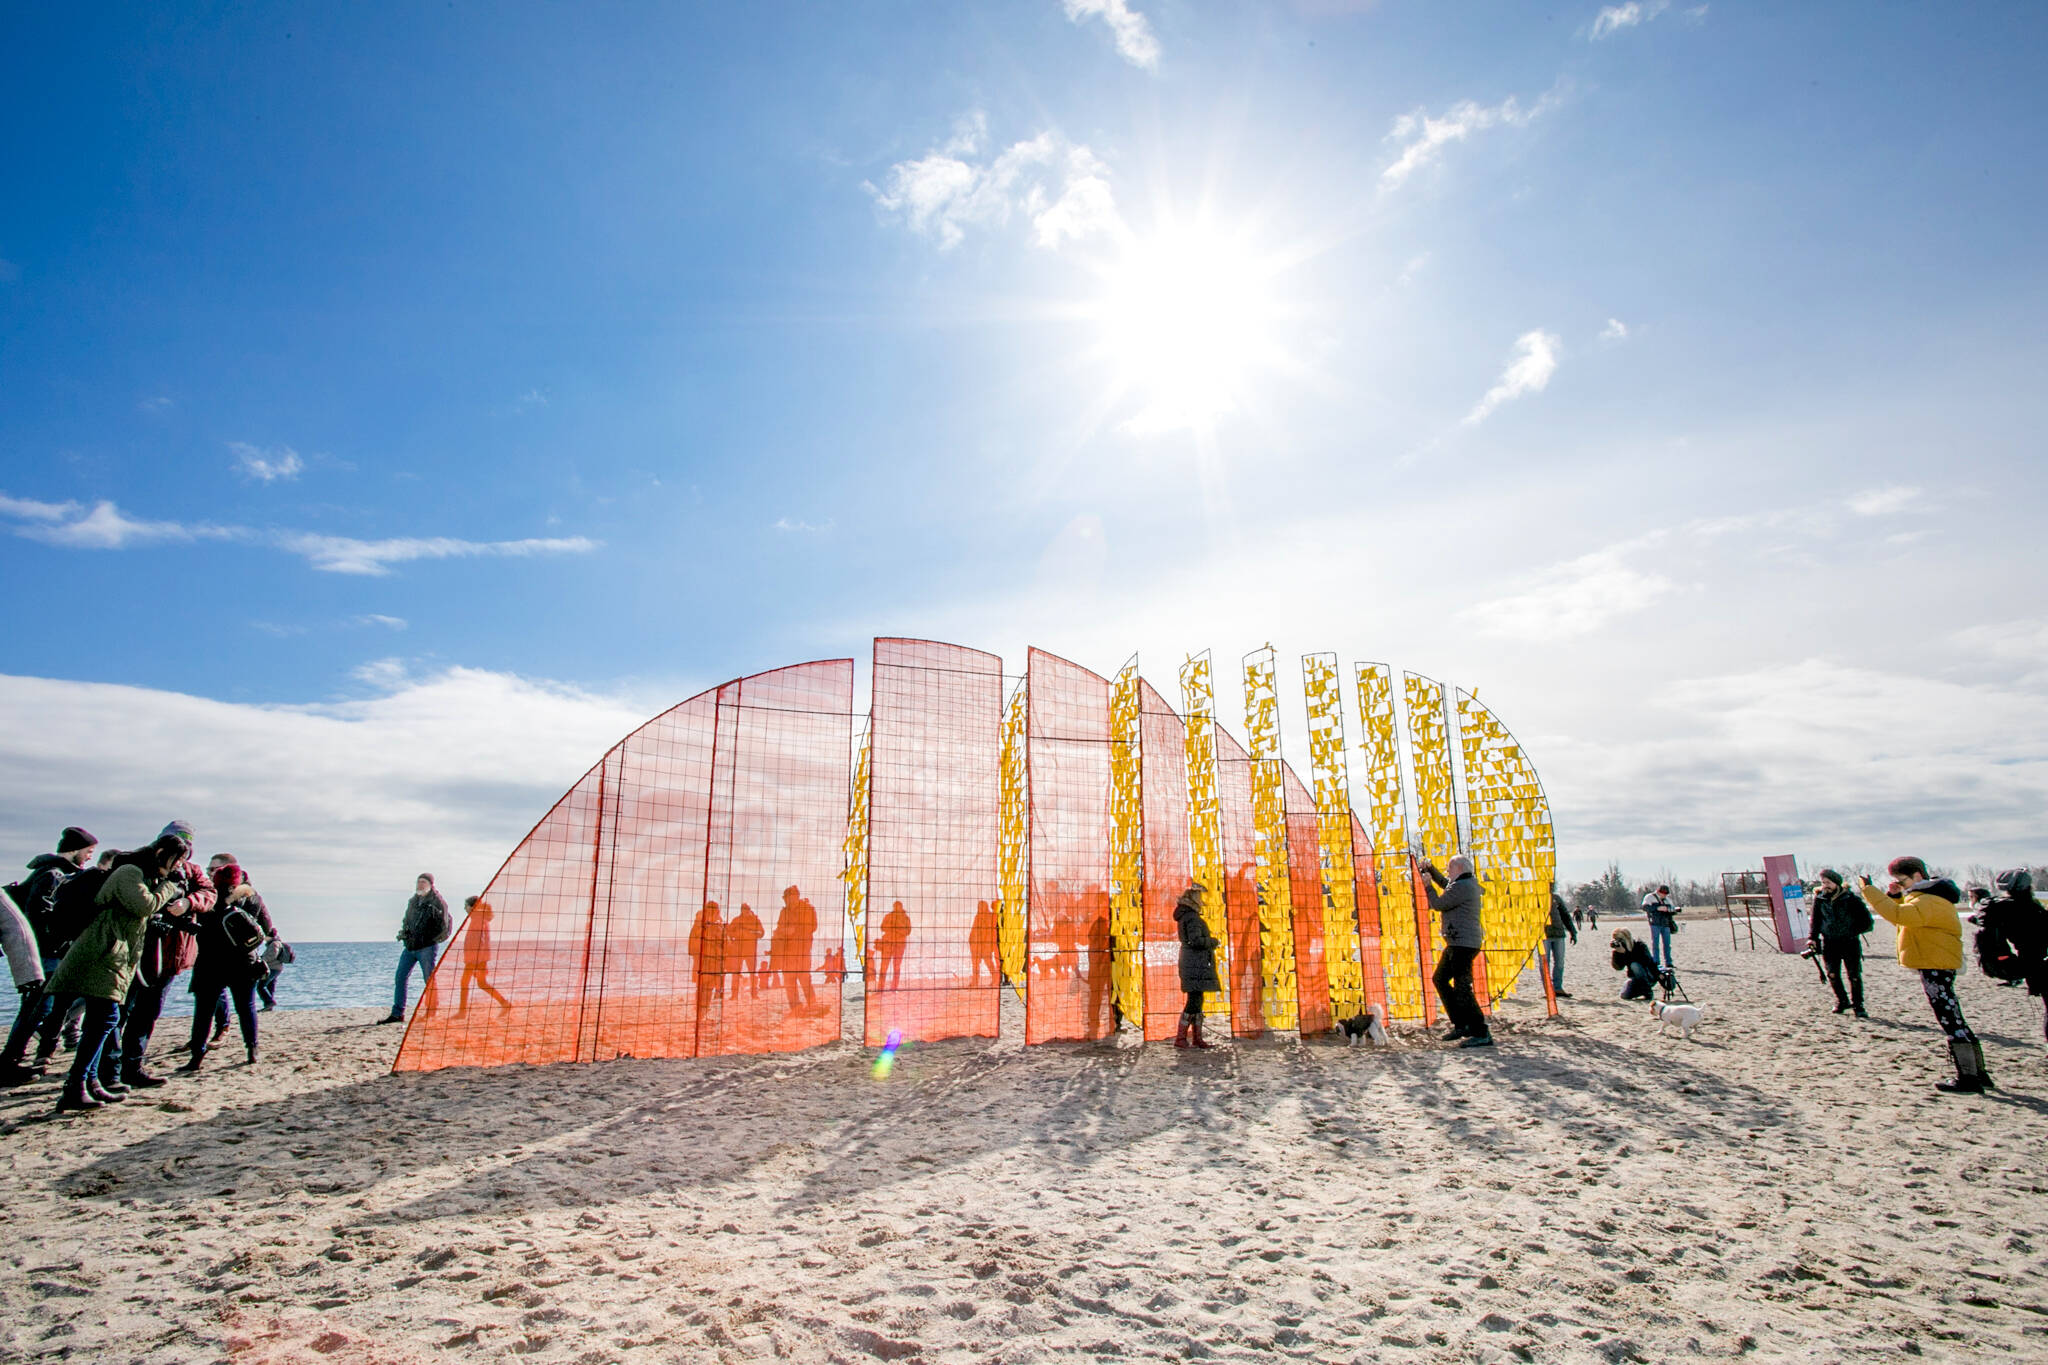 Toronto S Most Popular Beach Was Just Transformed Into Something Completely Different